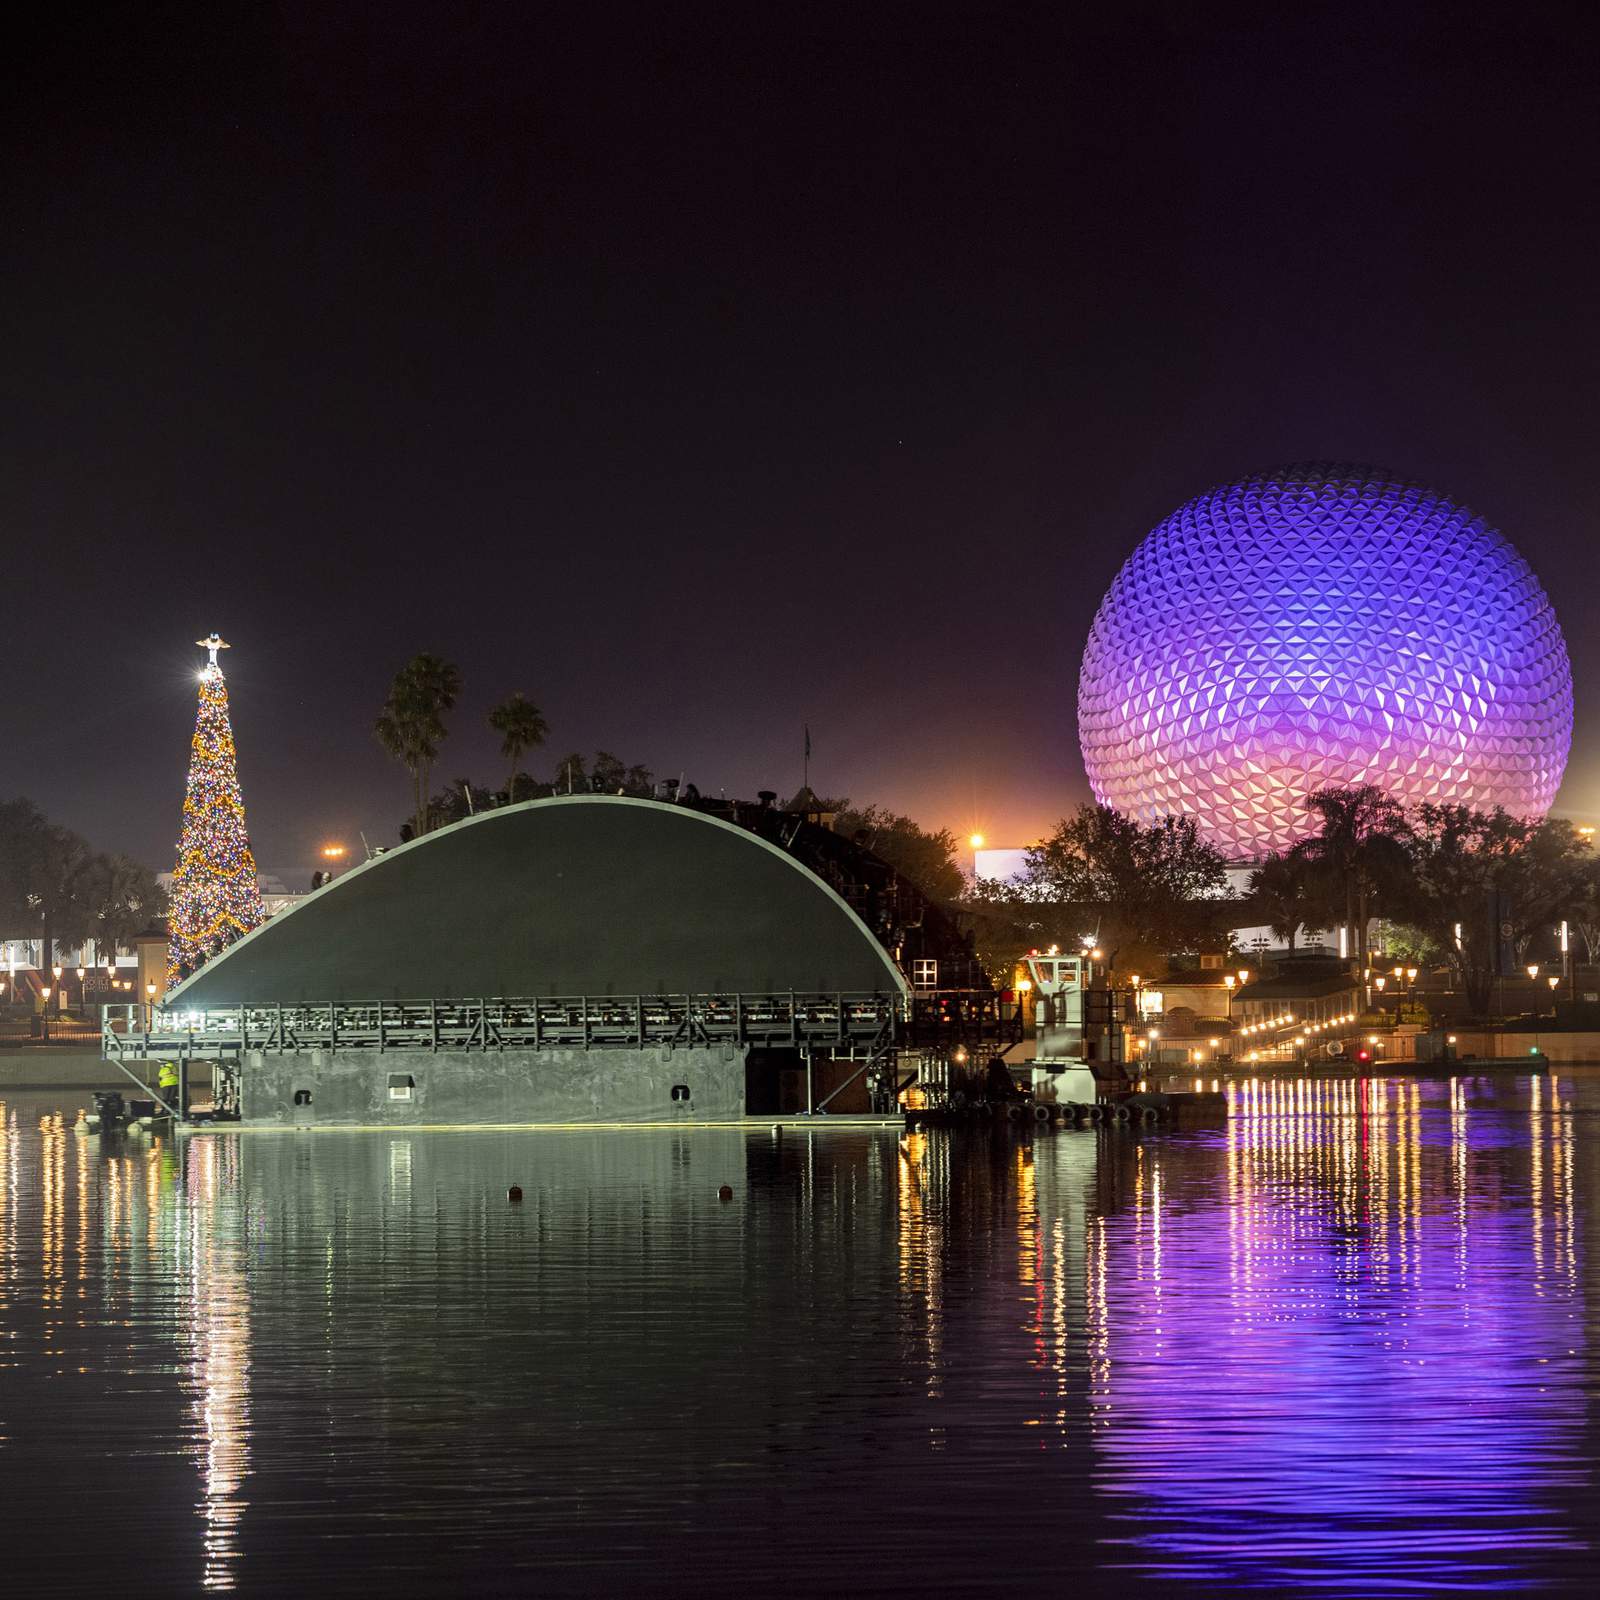 Disney rolls out first barge for new ‘Harmonious’ show at EPCOT